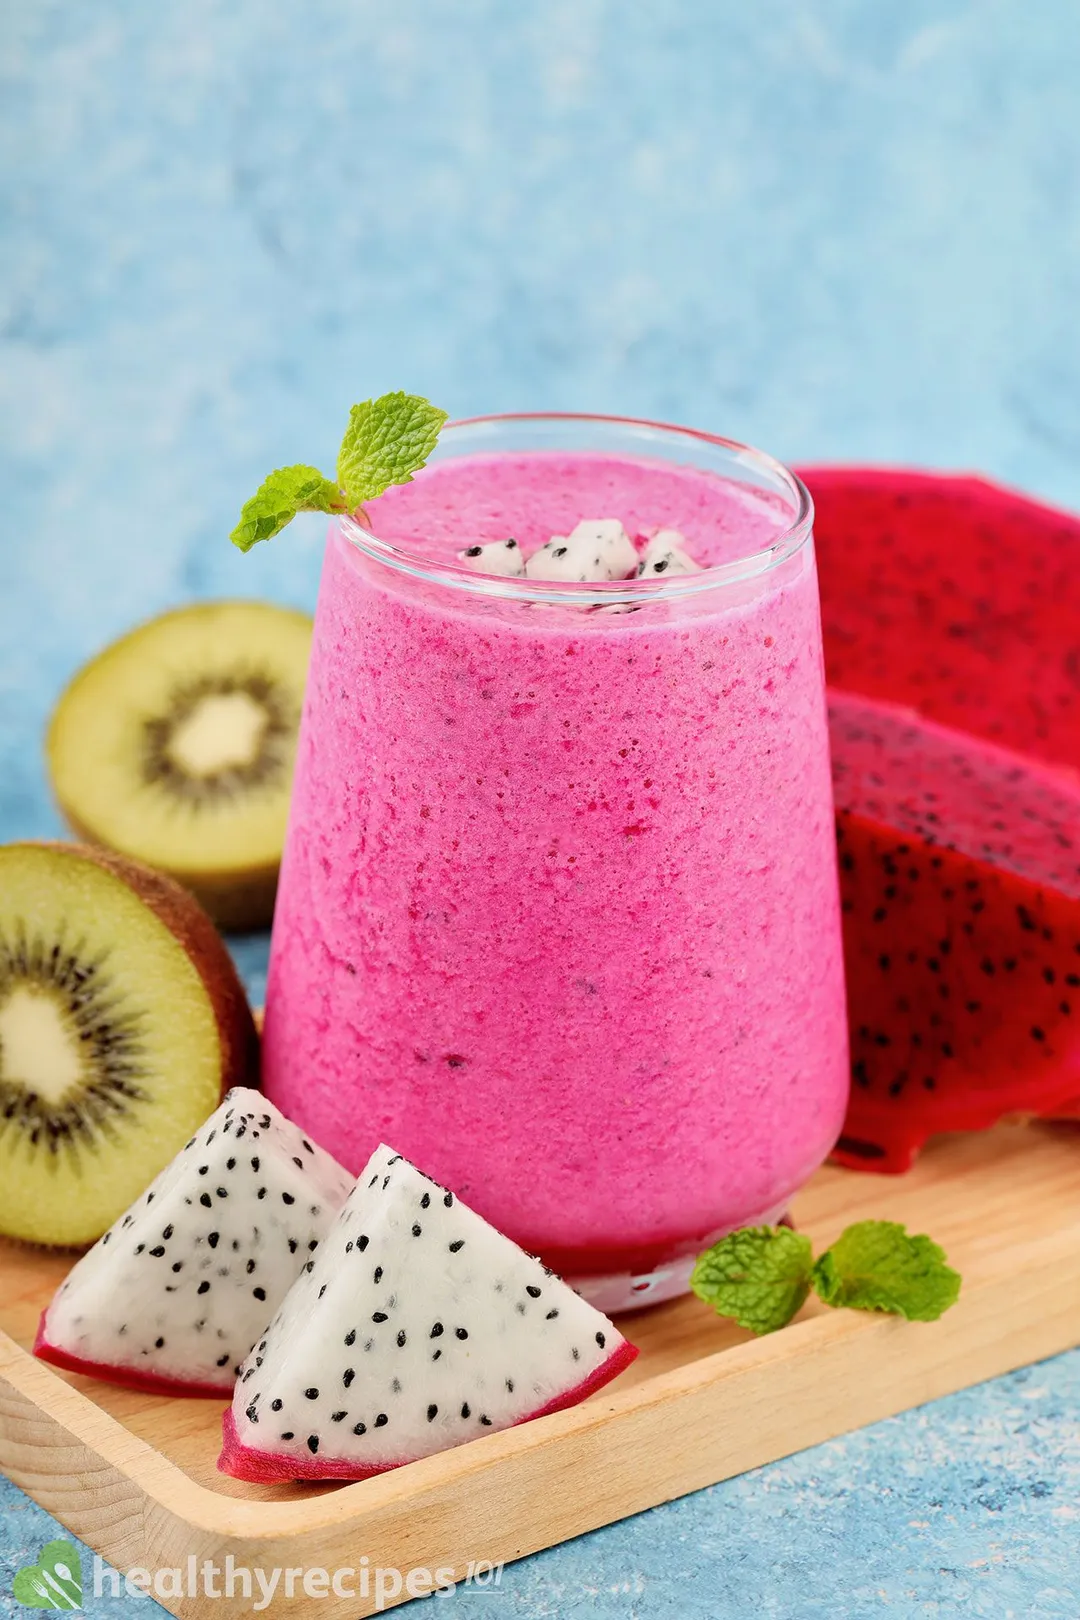 A glass of Dragon Fruit Smoothie placed on a wooden board near dragon fruit triangles, sliced green kiwis, and red dragon fruit.